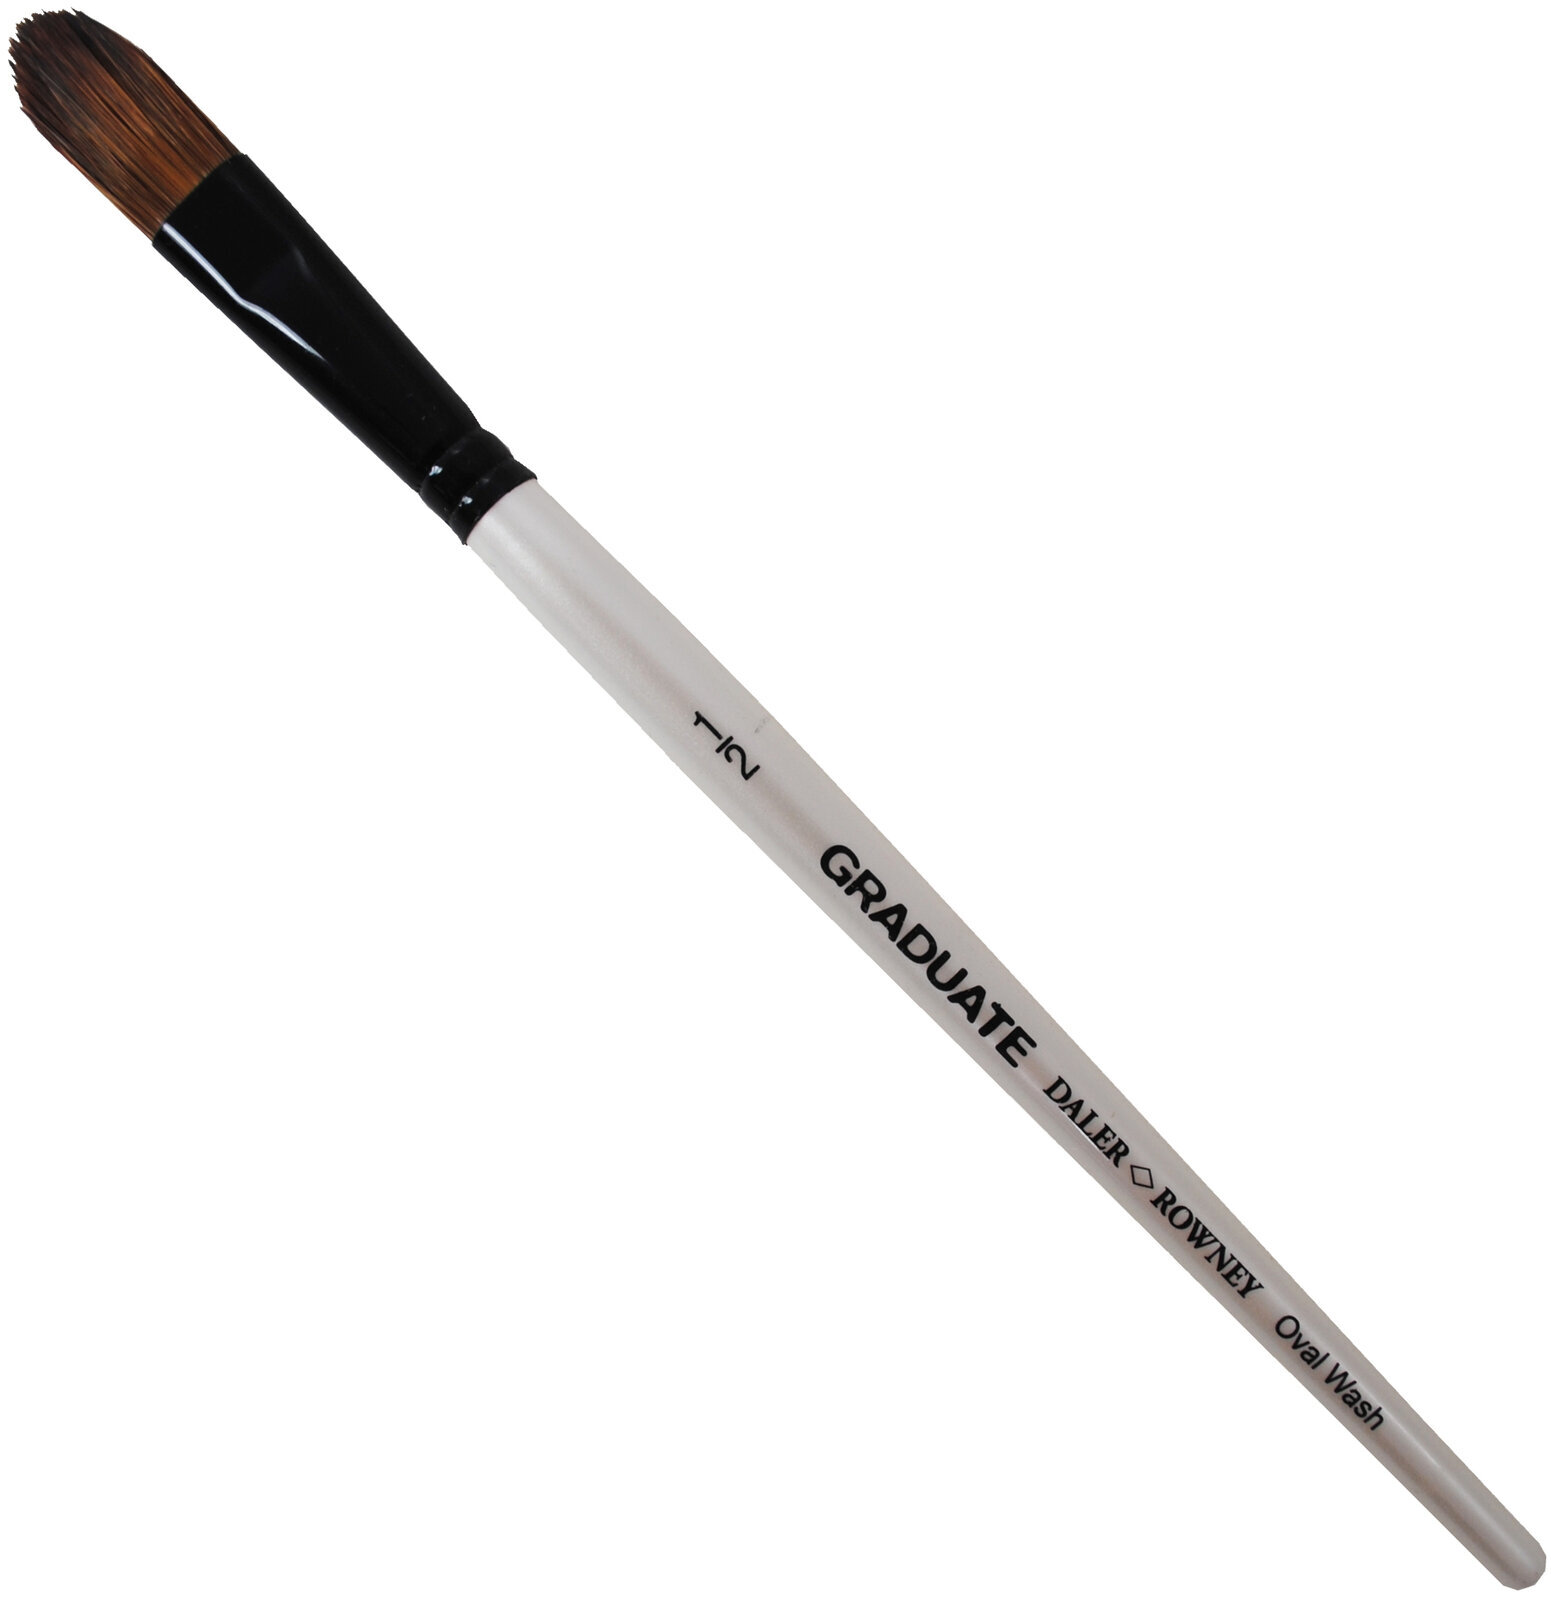 Pennello Daler Rowney Graduate Watercolour Brush Pony & Synthetic Pennello ovale 1/2 1 pz